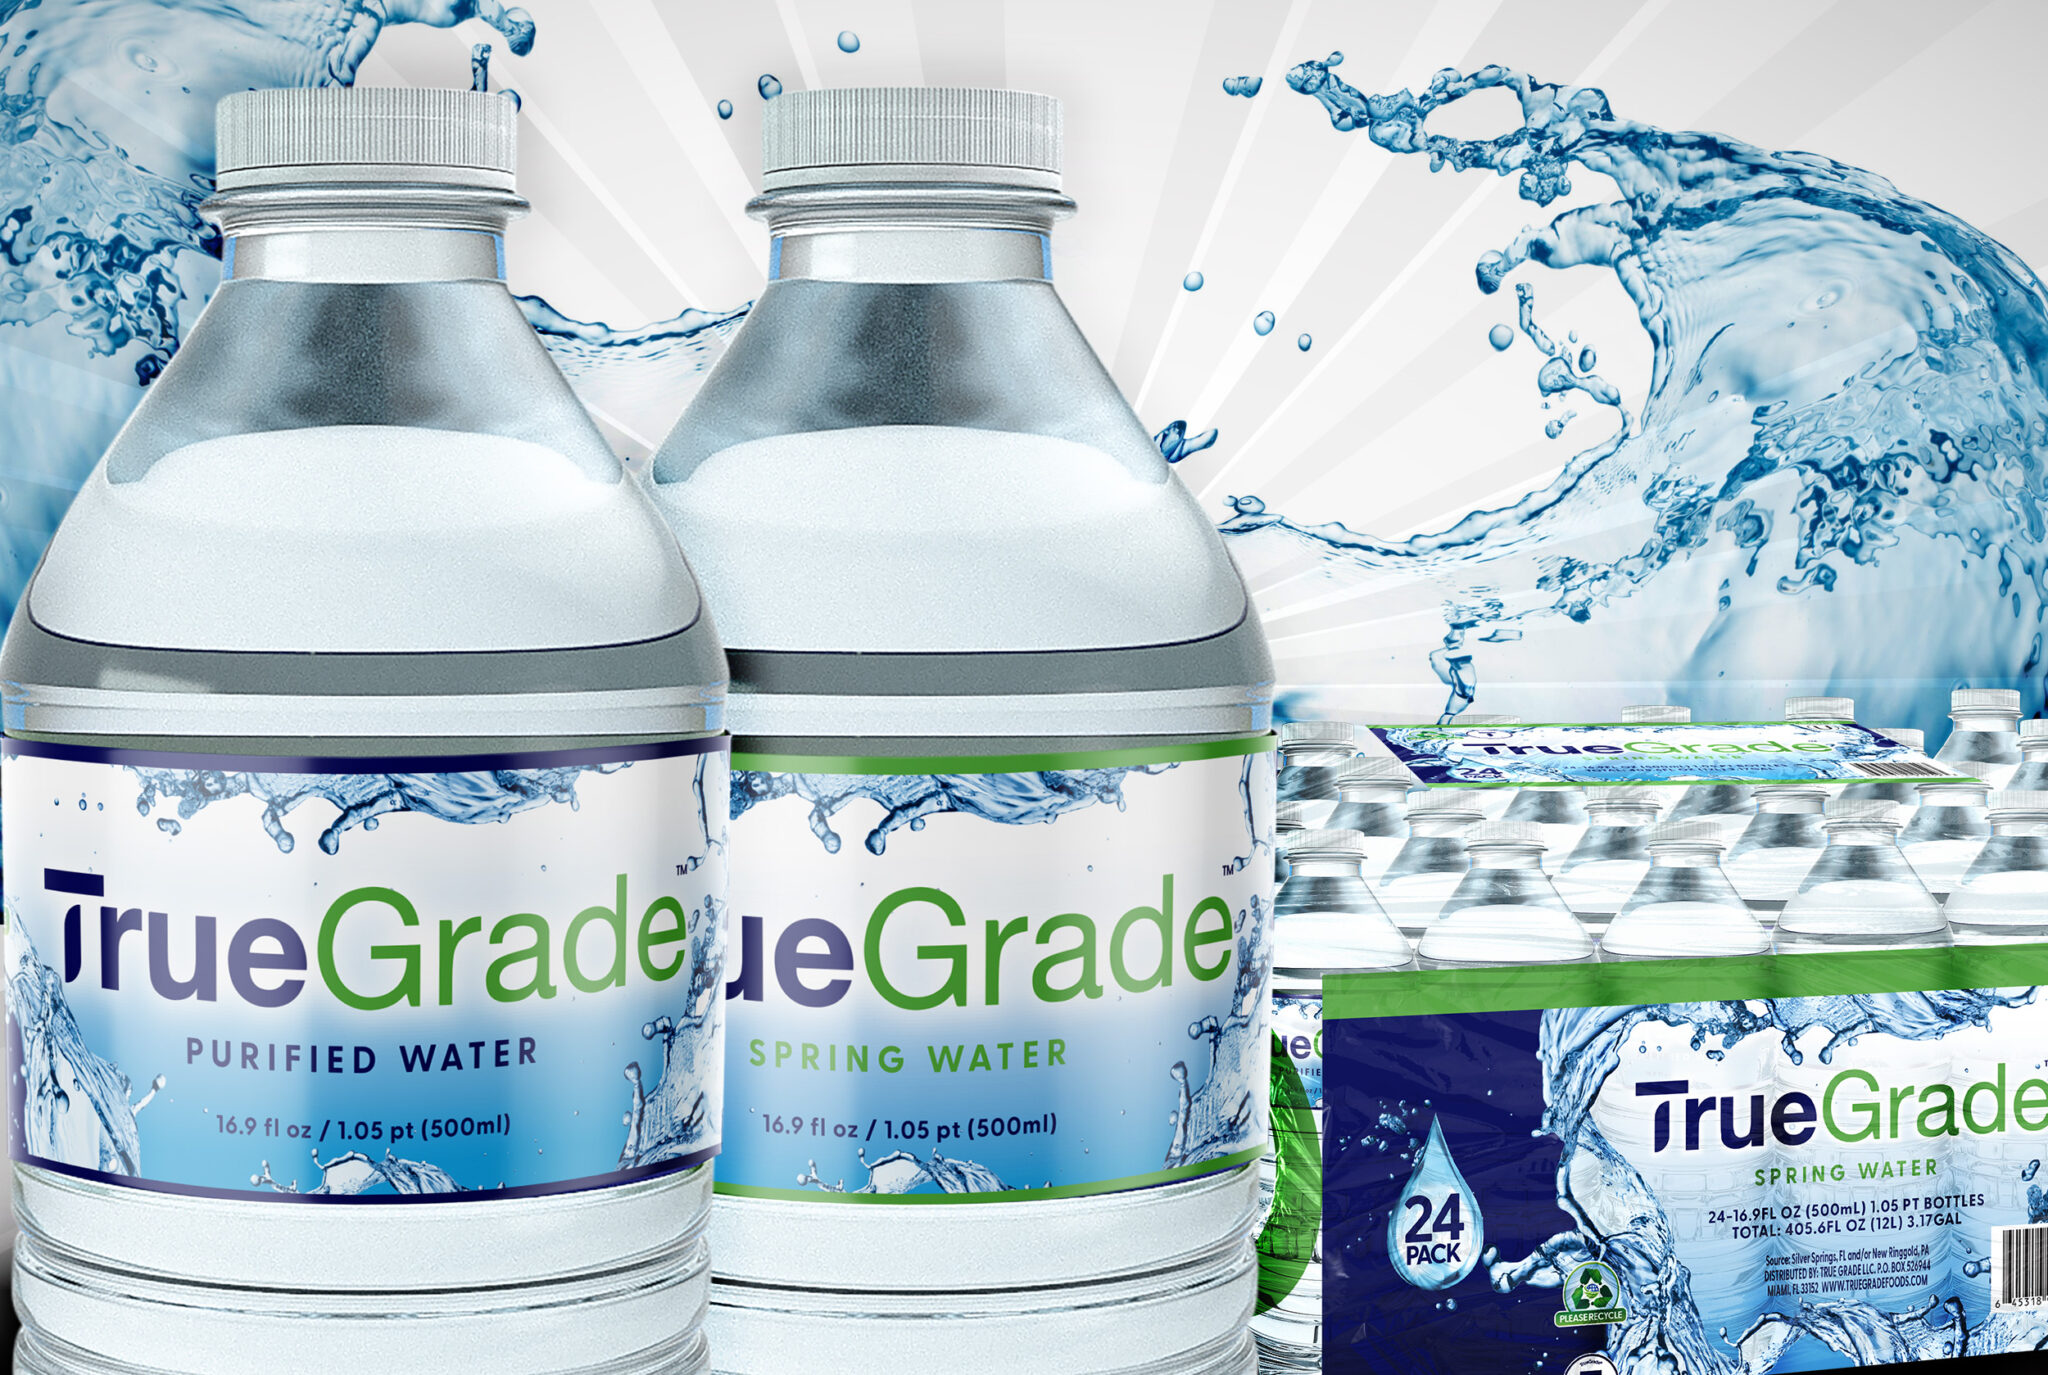 True Grade Announces Consolidation and Expansion of the True Grade Brand